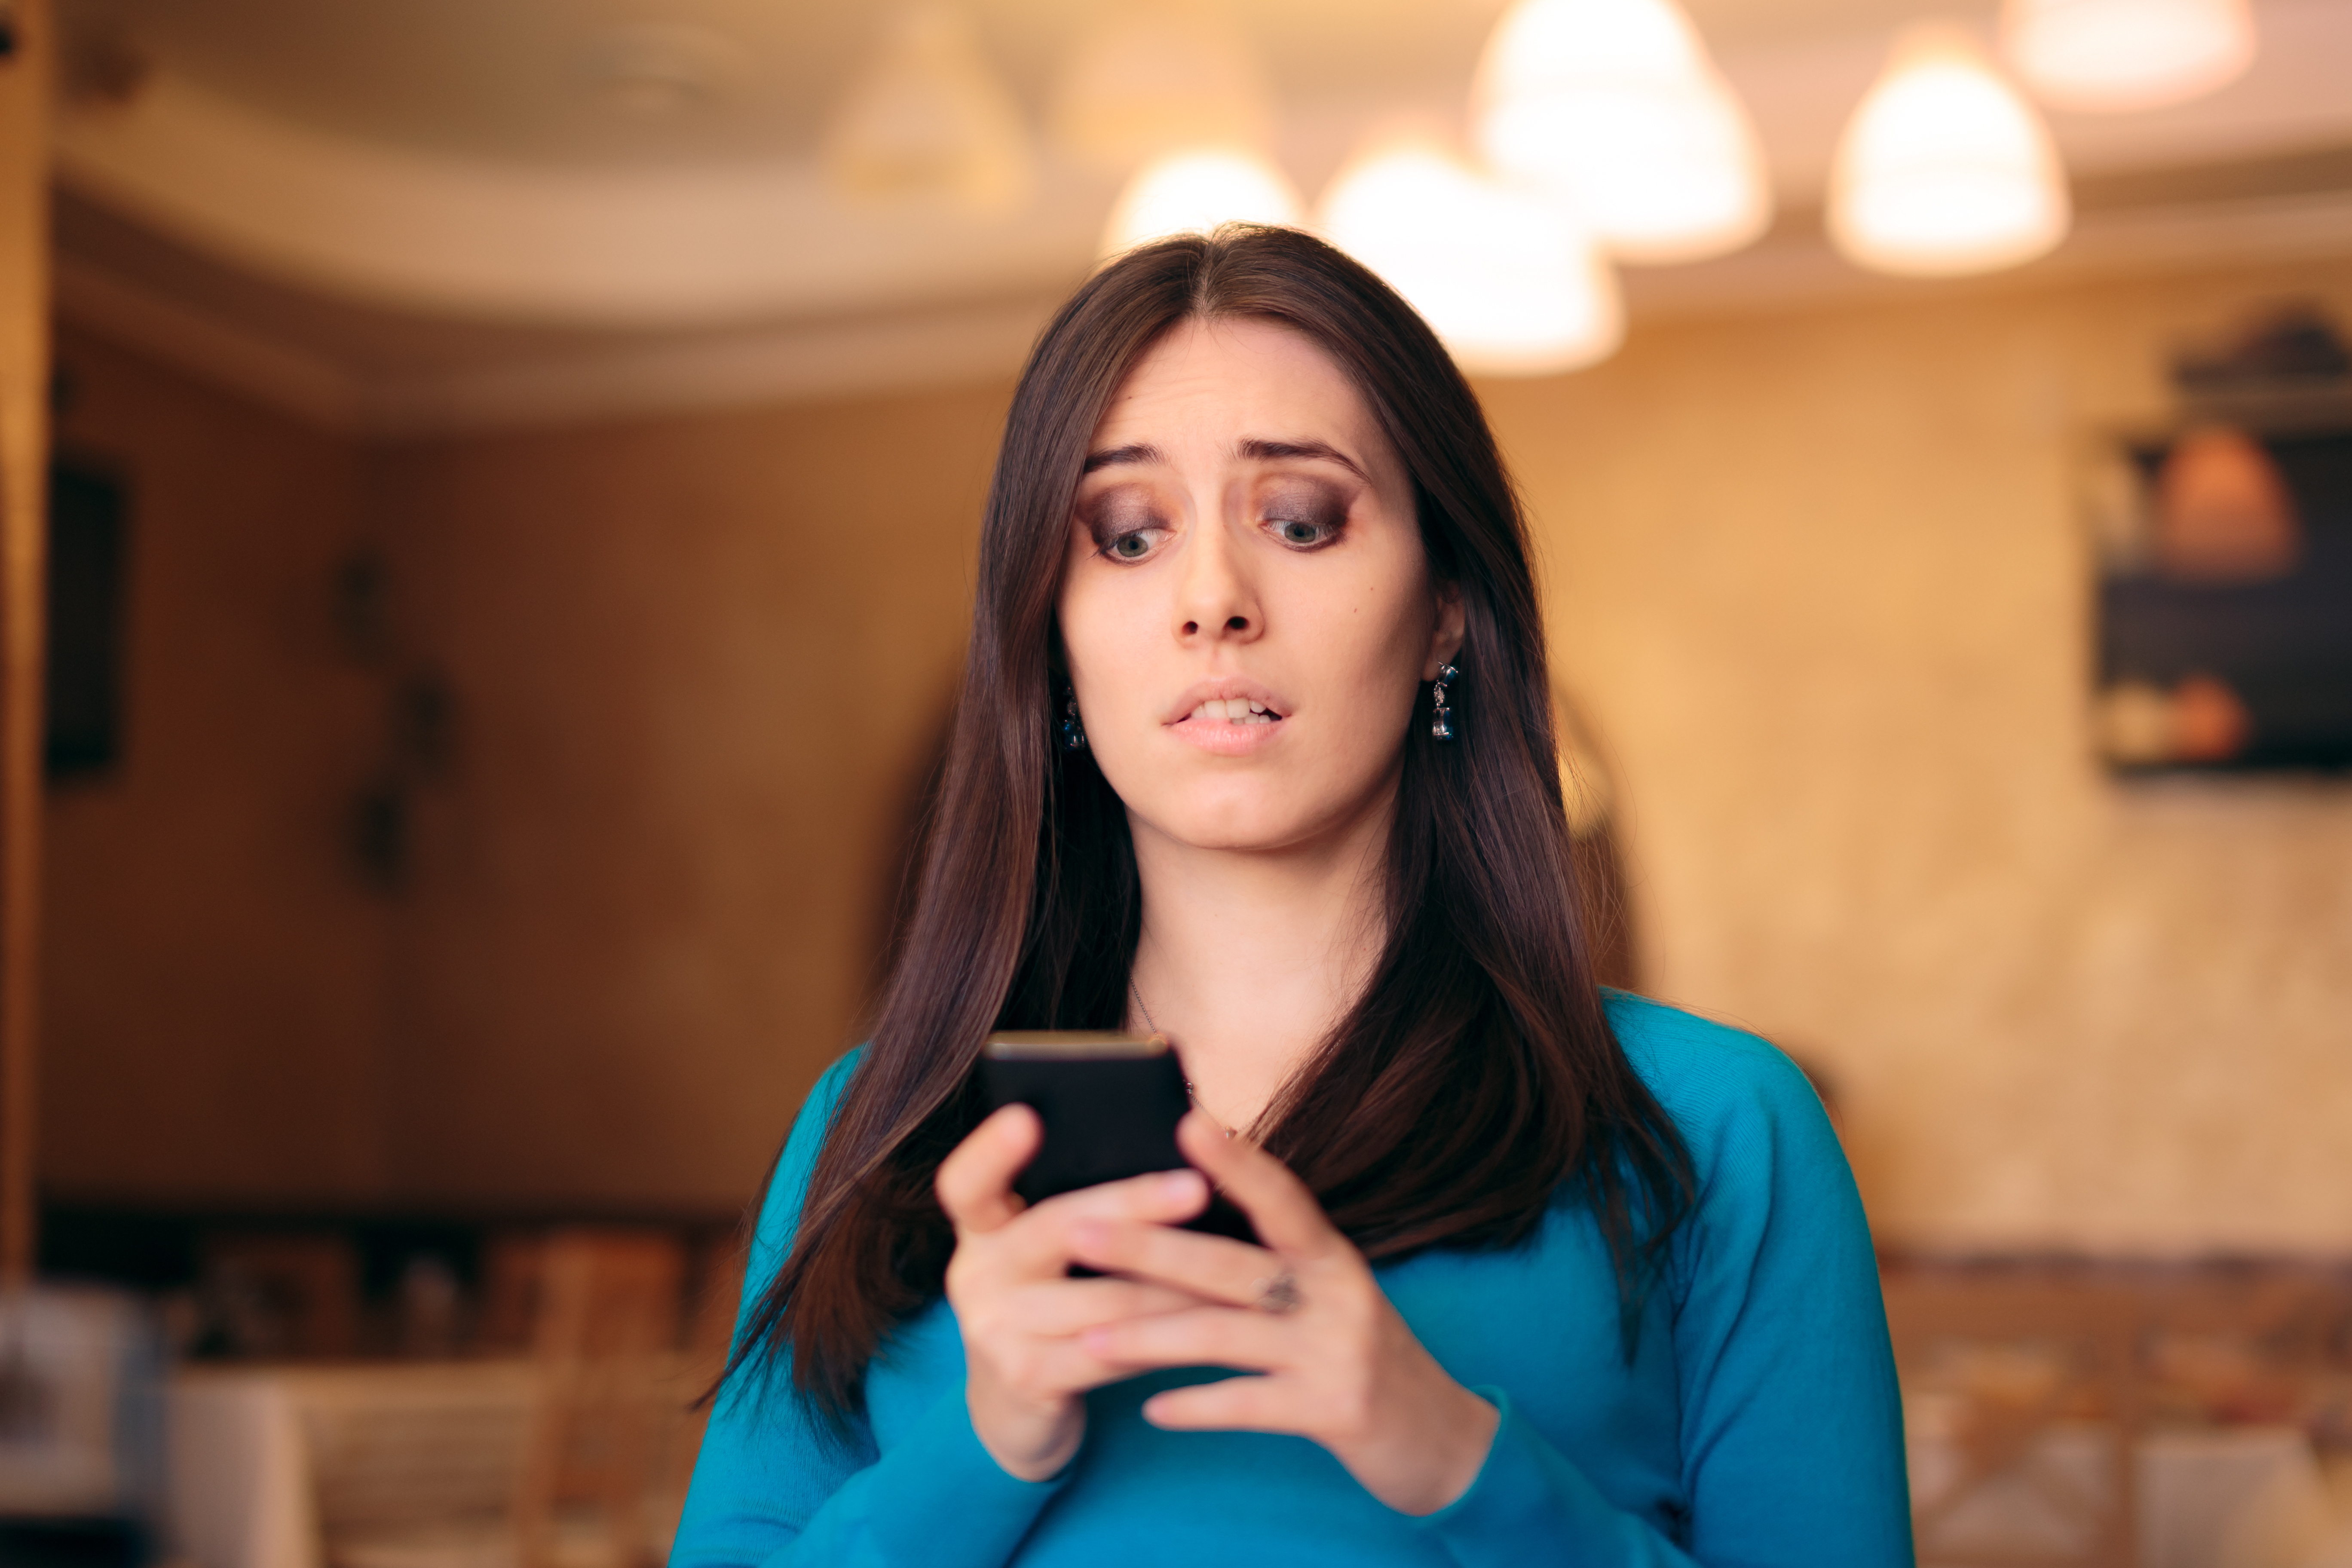 A woman looking shocked while on her phone | Source: Shutterstock